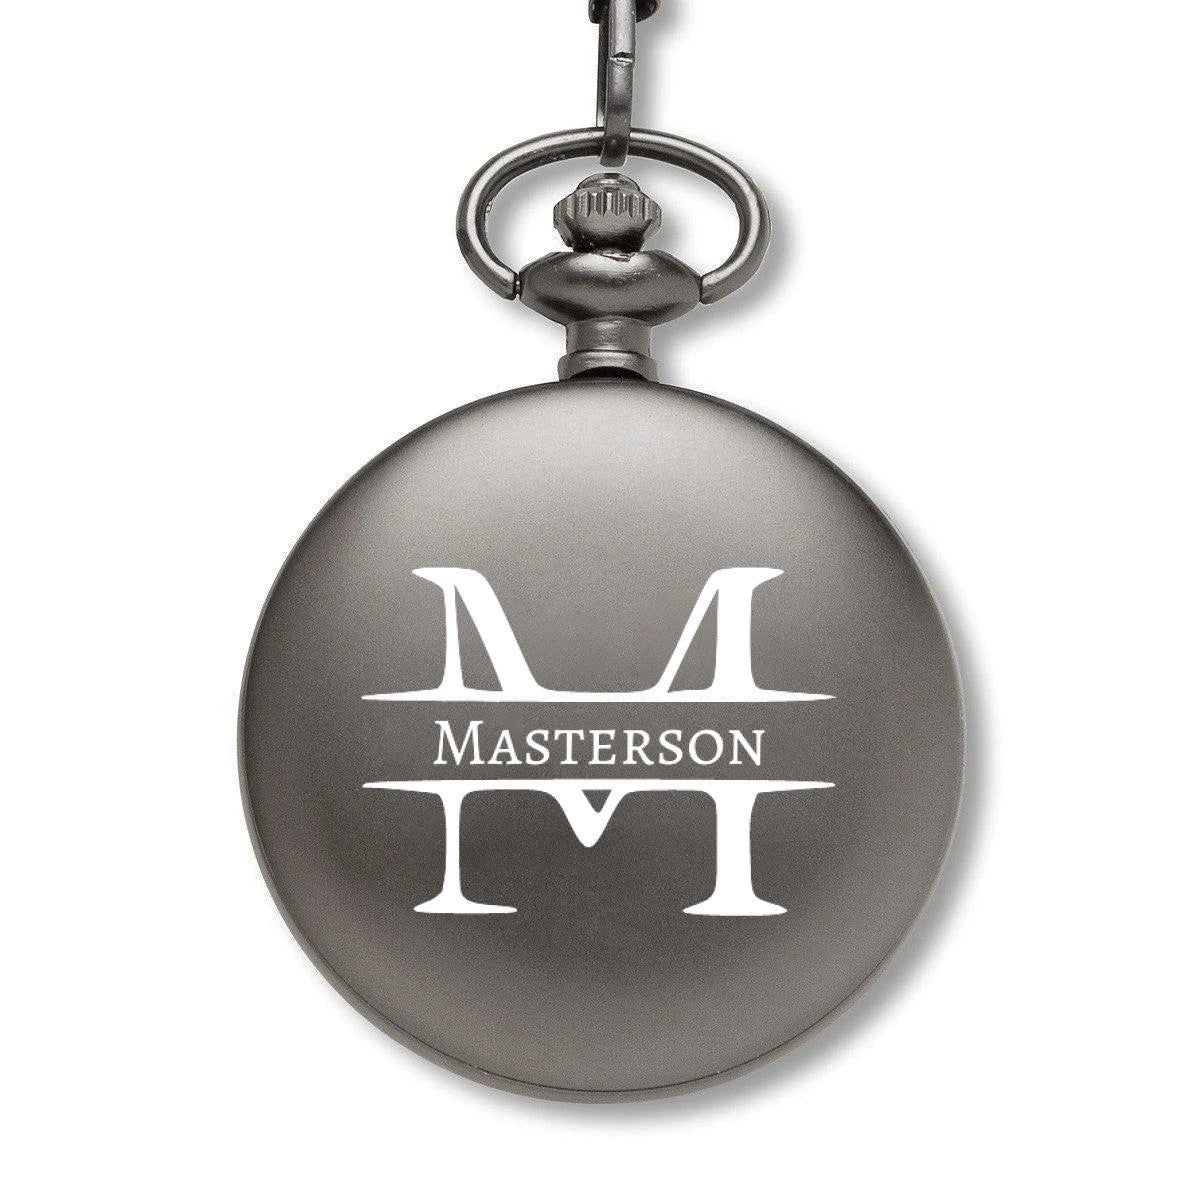 Personalized Open Face Pocket Watch - Split Initial with Name